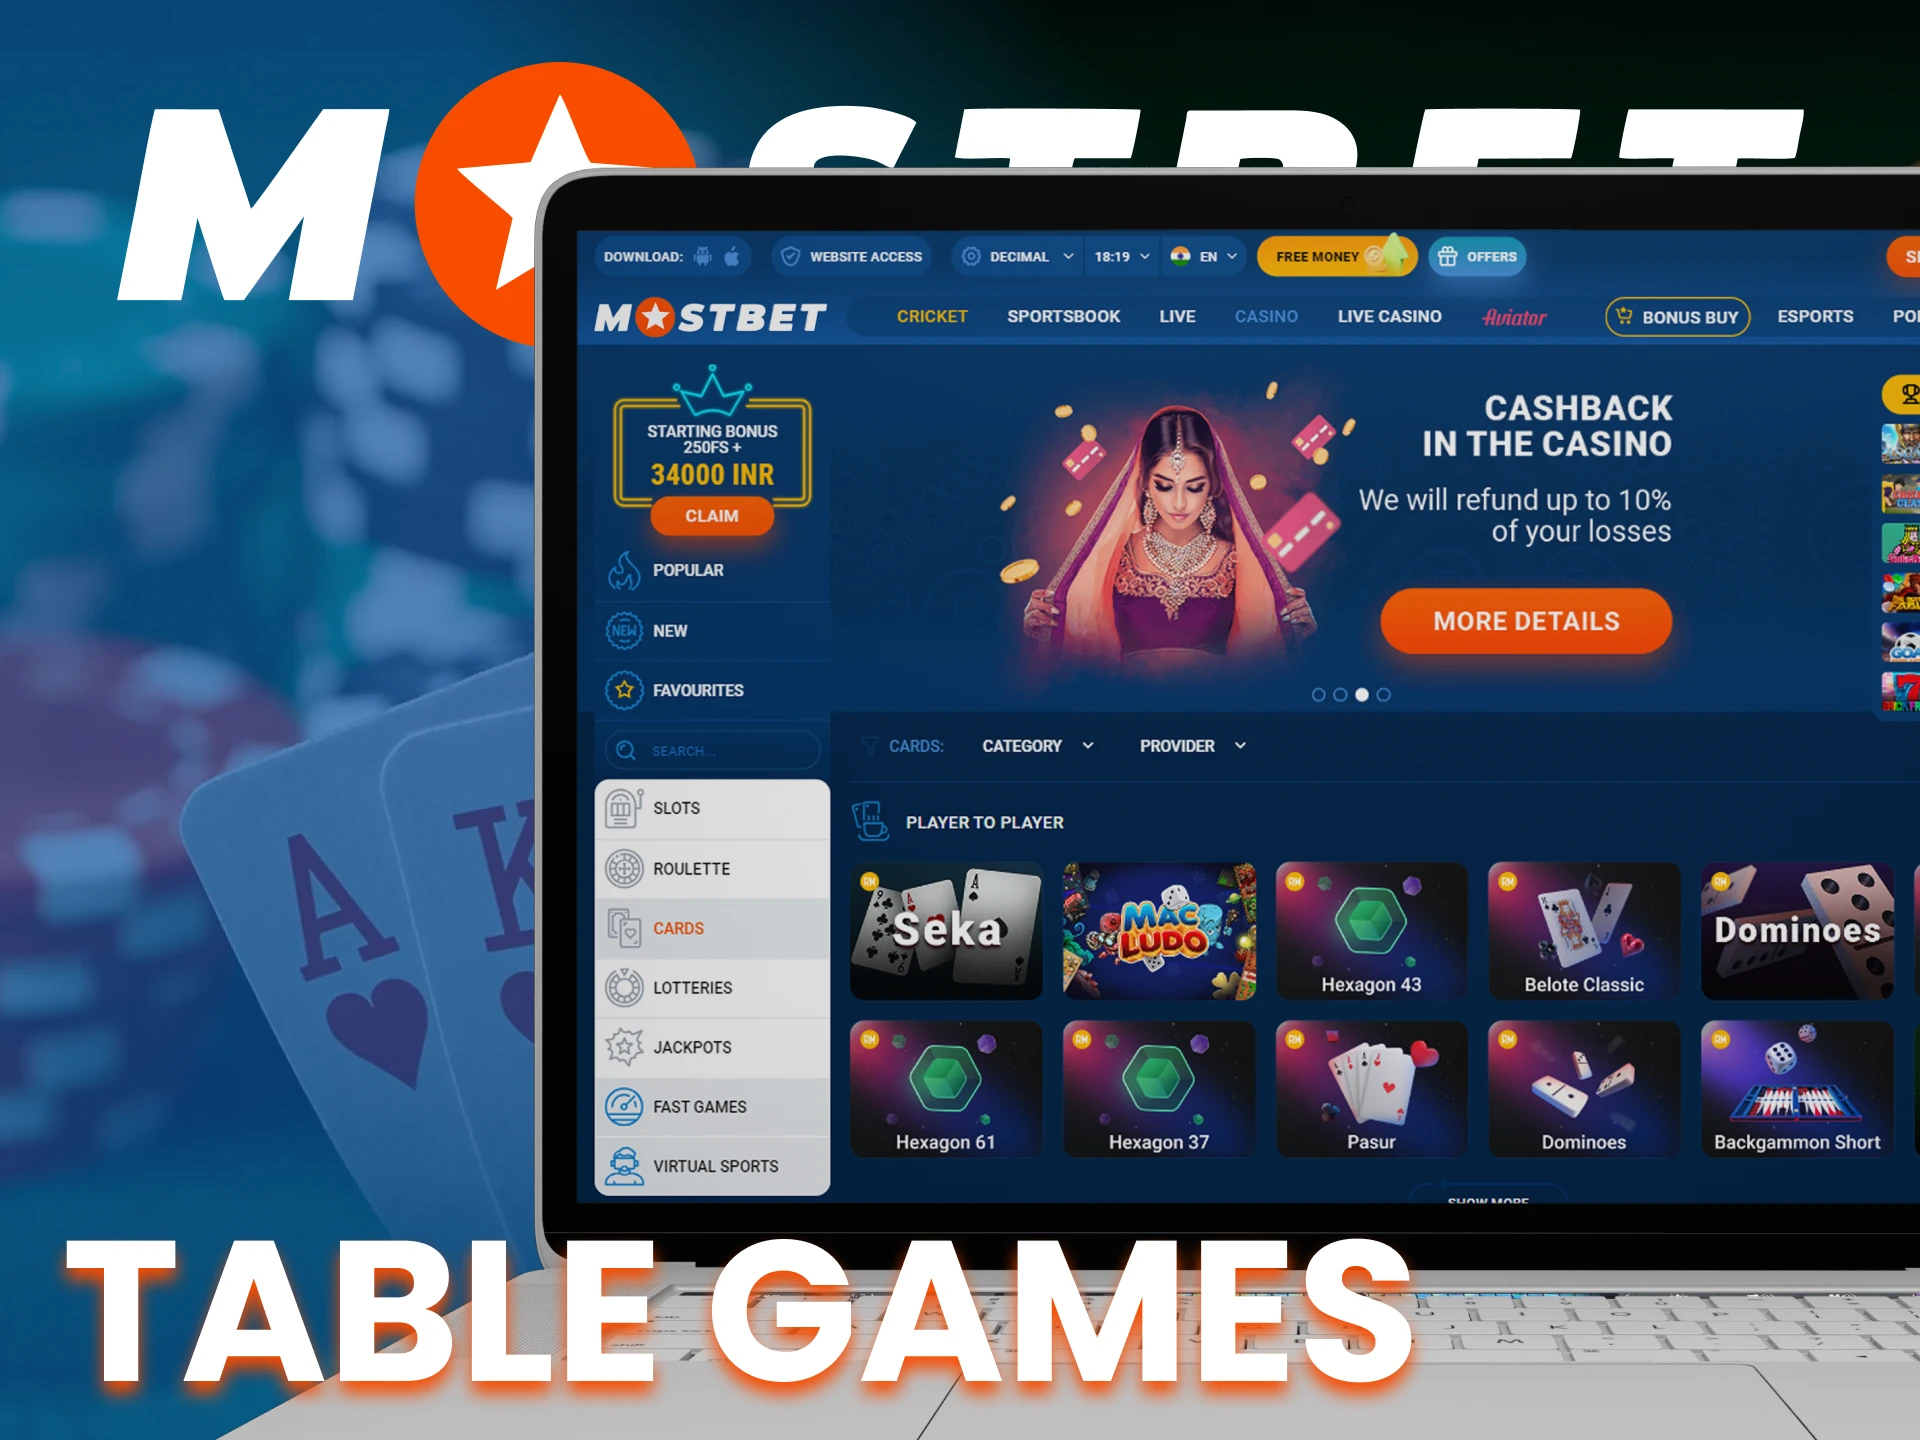 At Mostbet, play table games at the casino.